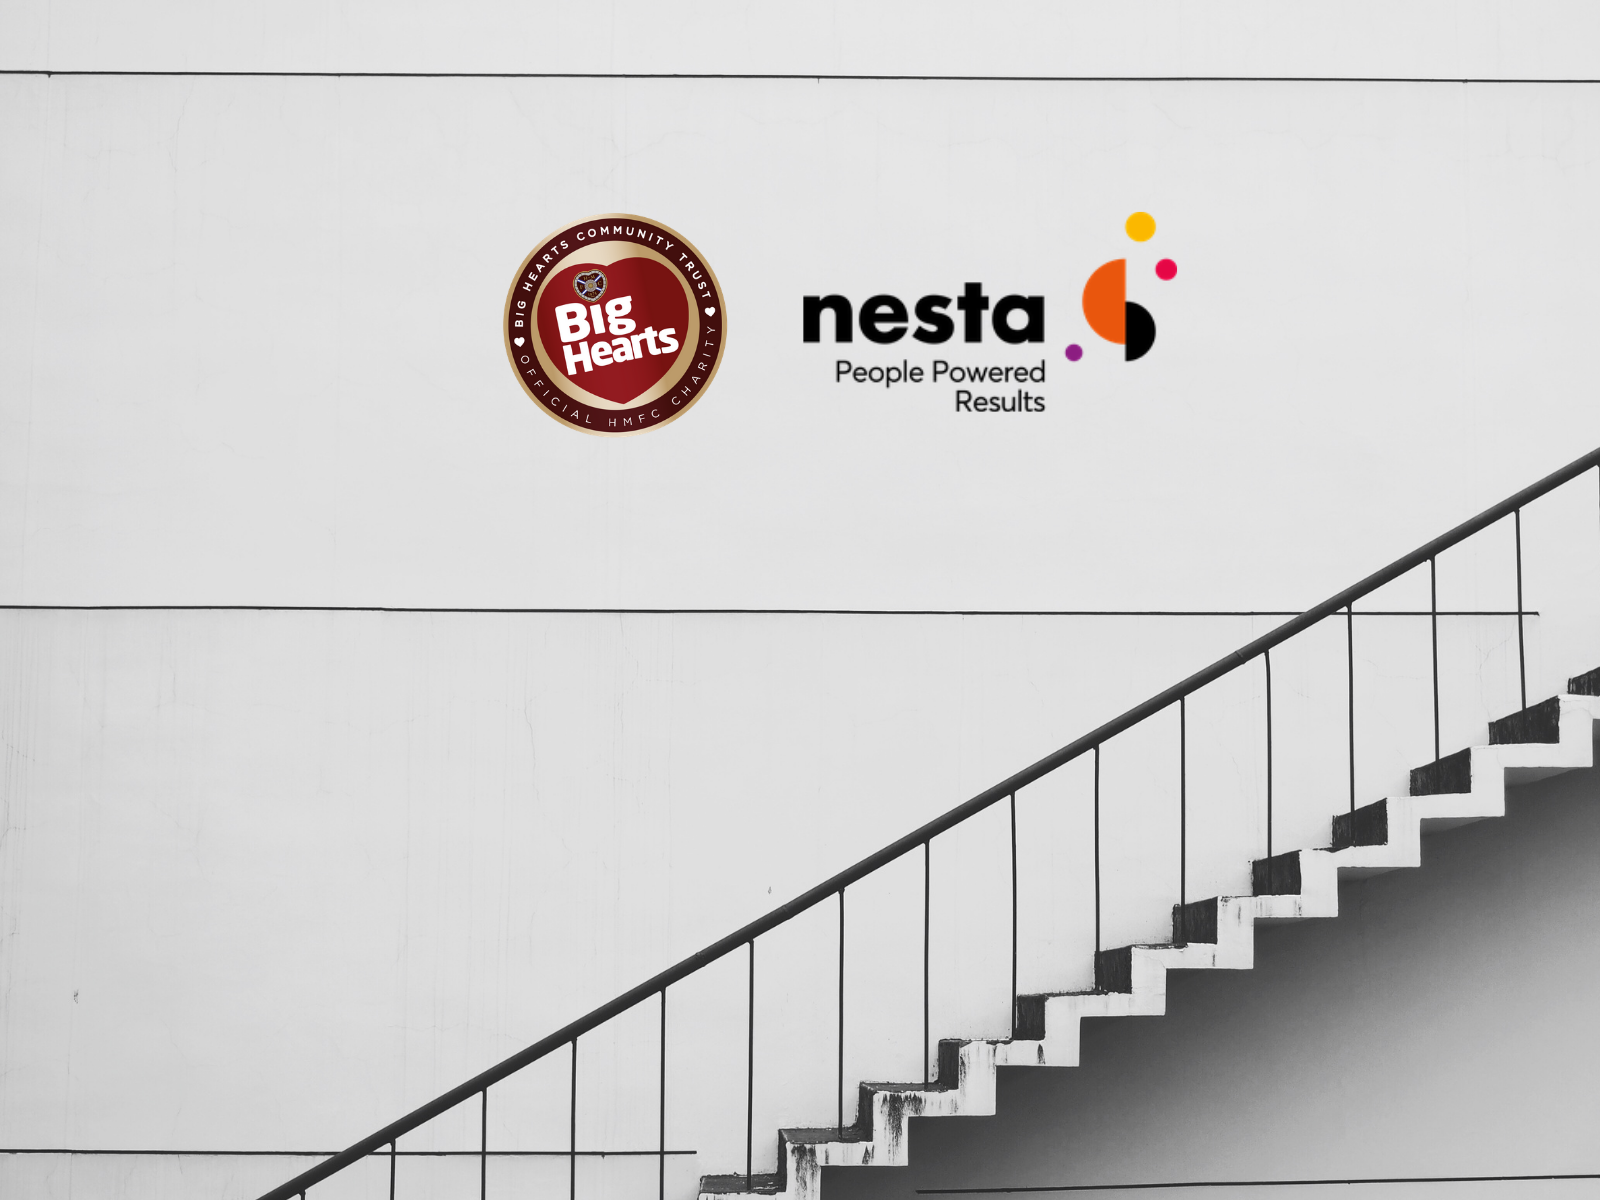  » BIG HEARTS TEAM UP WITH NESTA TO BUILD NEW 2022-2025 STRATEGY